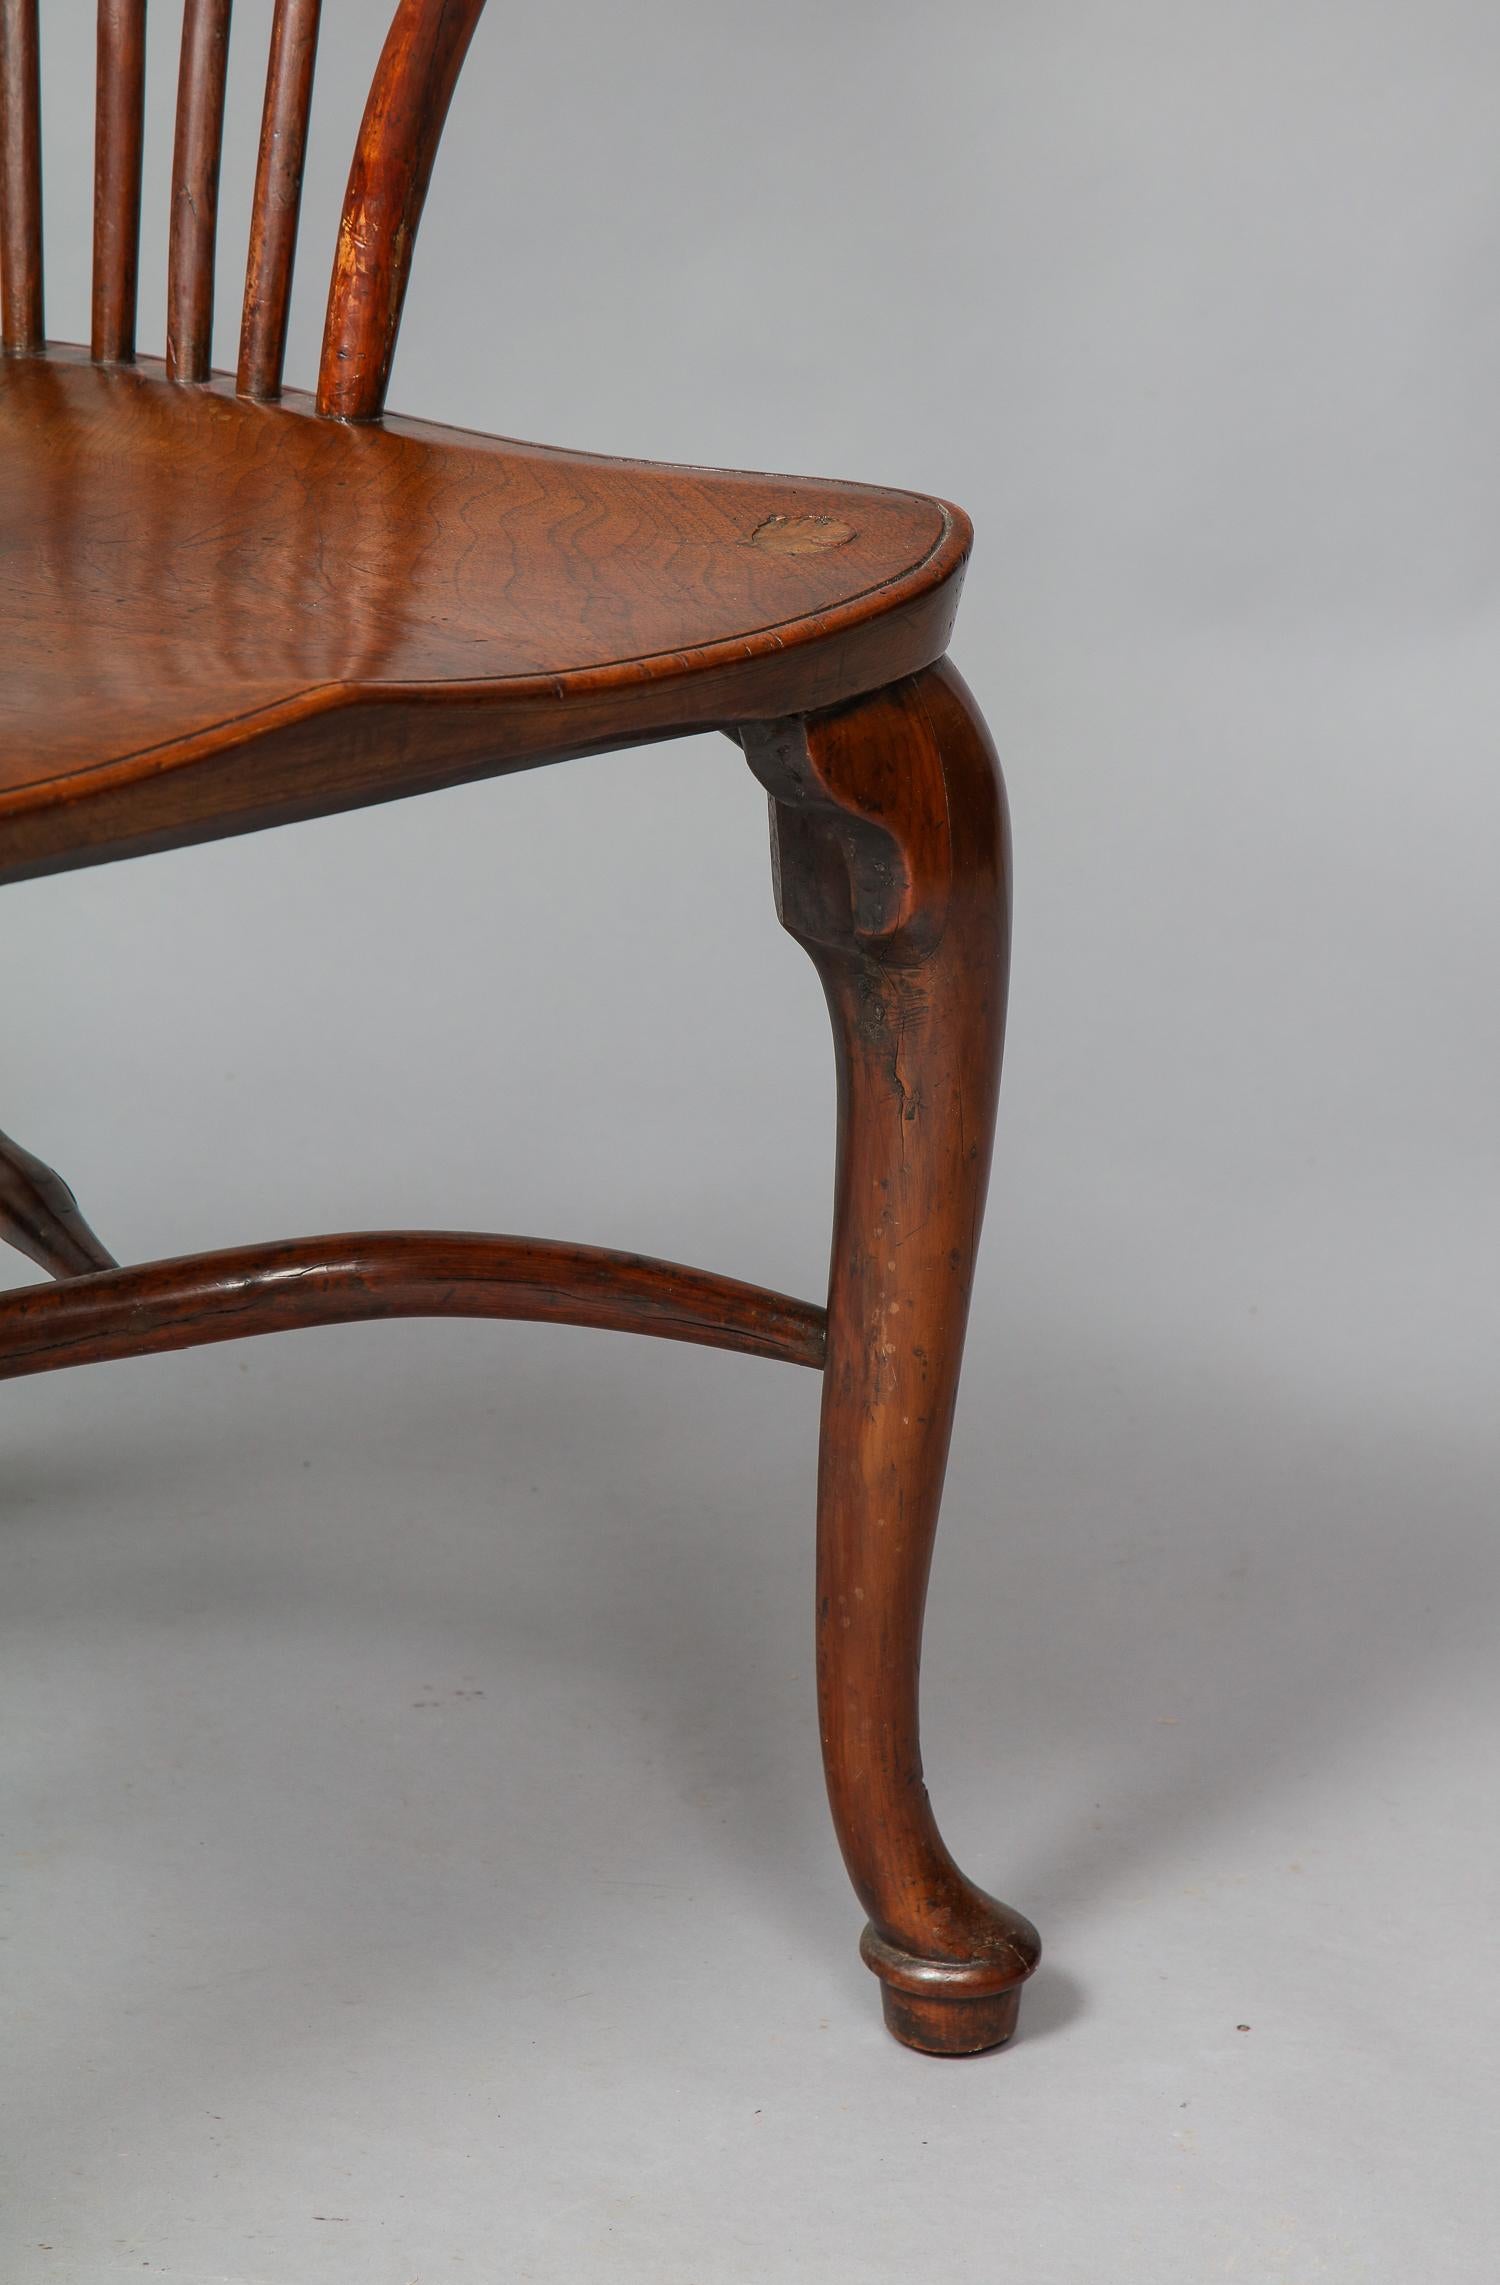 George II 18th Century English Thames Valley Windsor Chair